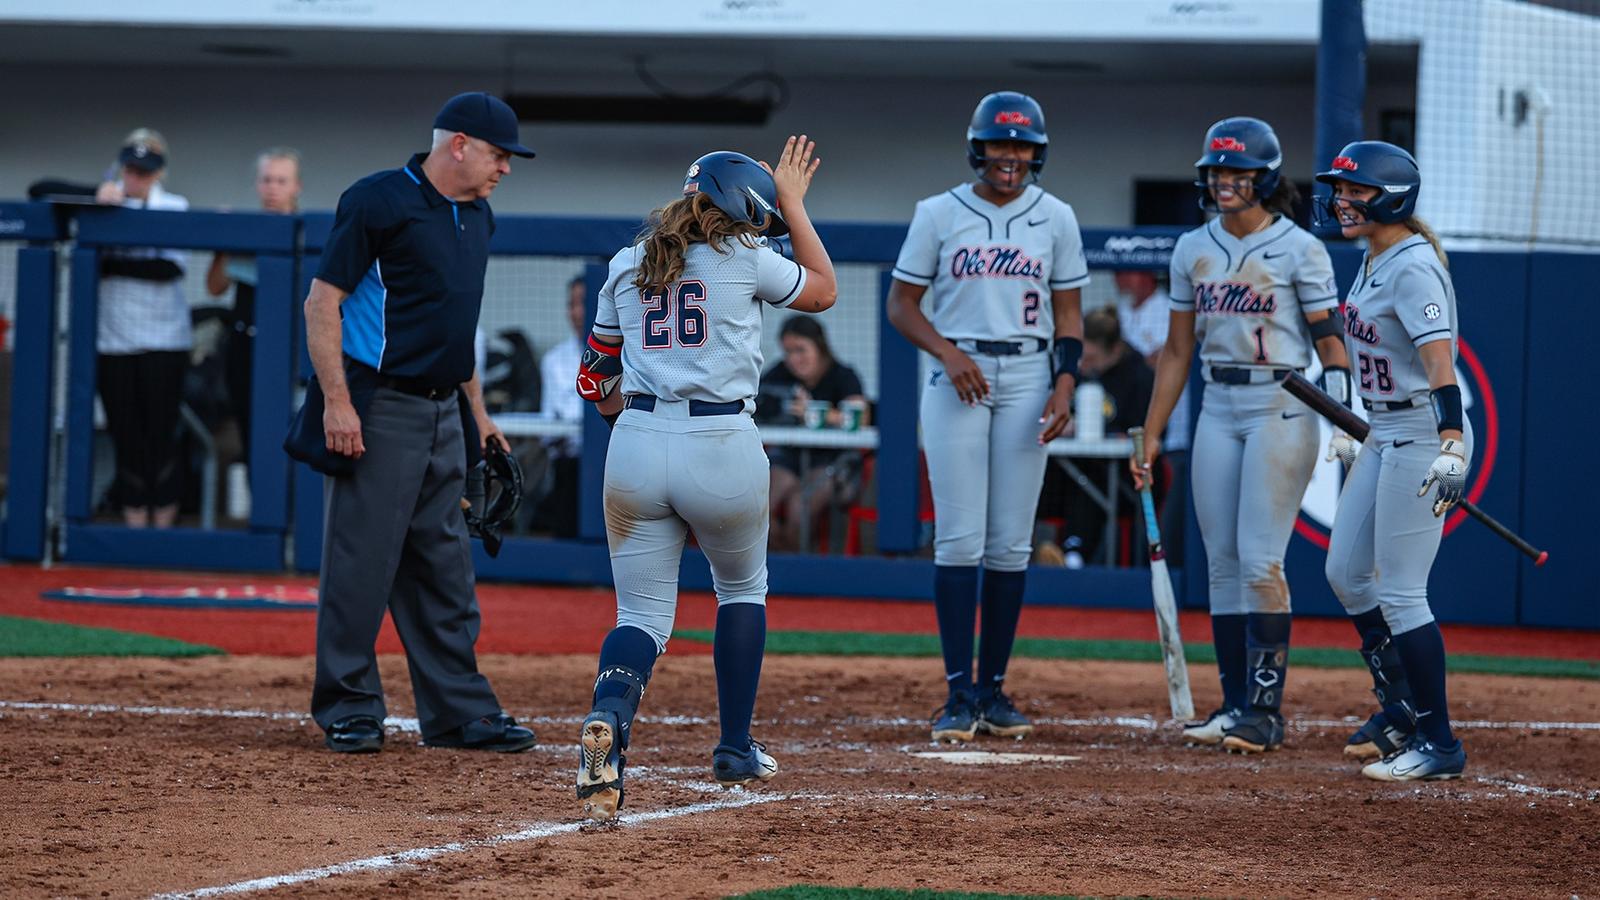 Power Plays: Ole Miss Softball Defeats Southern Miss with Home Runs and Exceptional Pitching